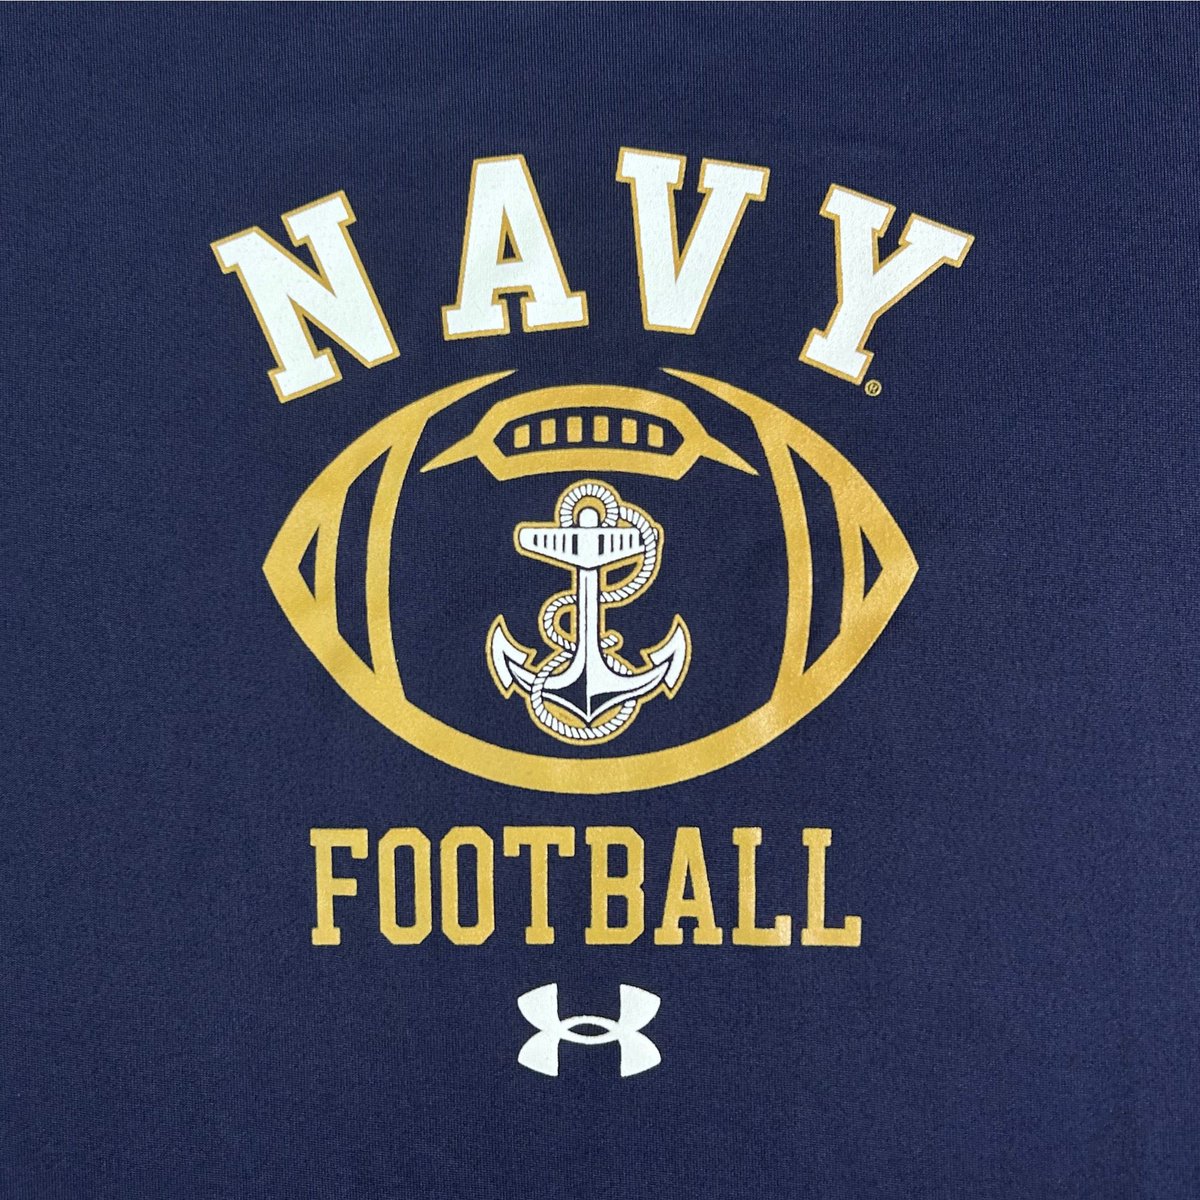 Thanks to @NavyFB for coming by to recruit the Wildcats! #theNAVYway